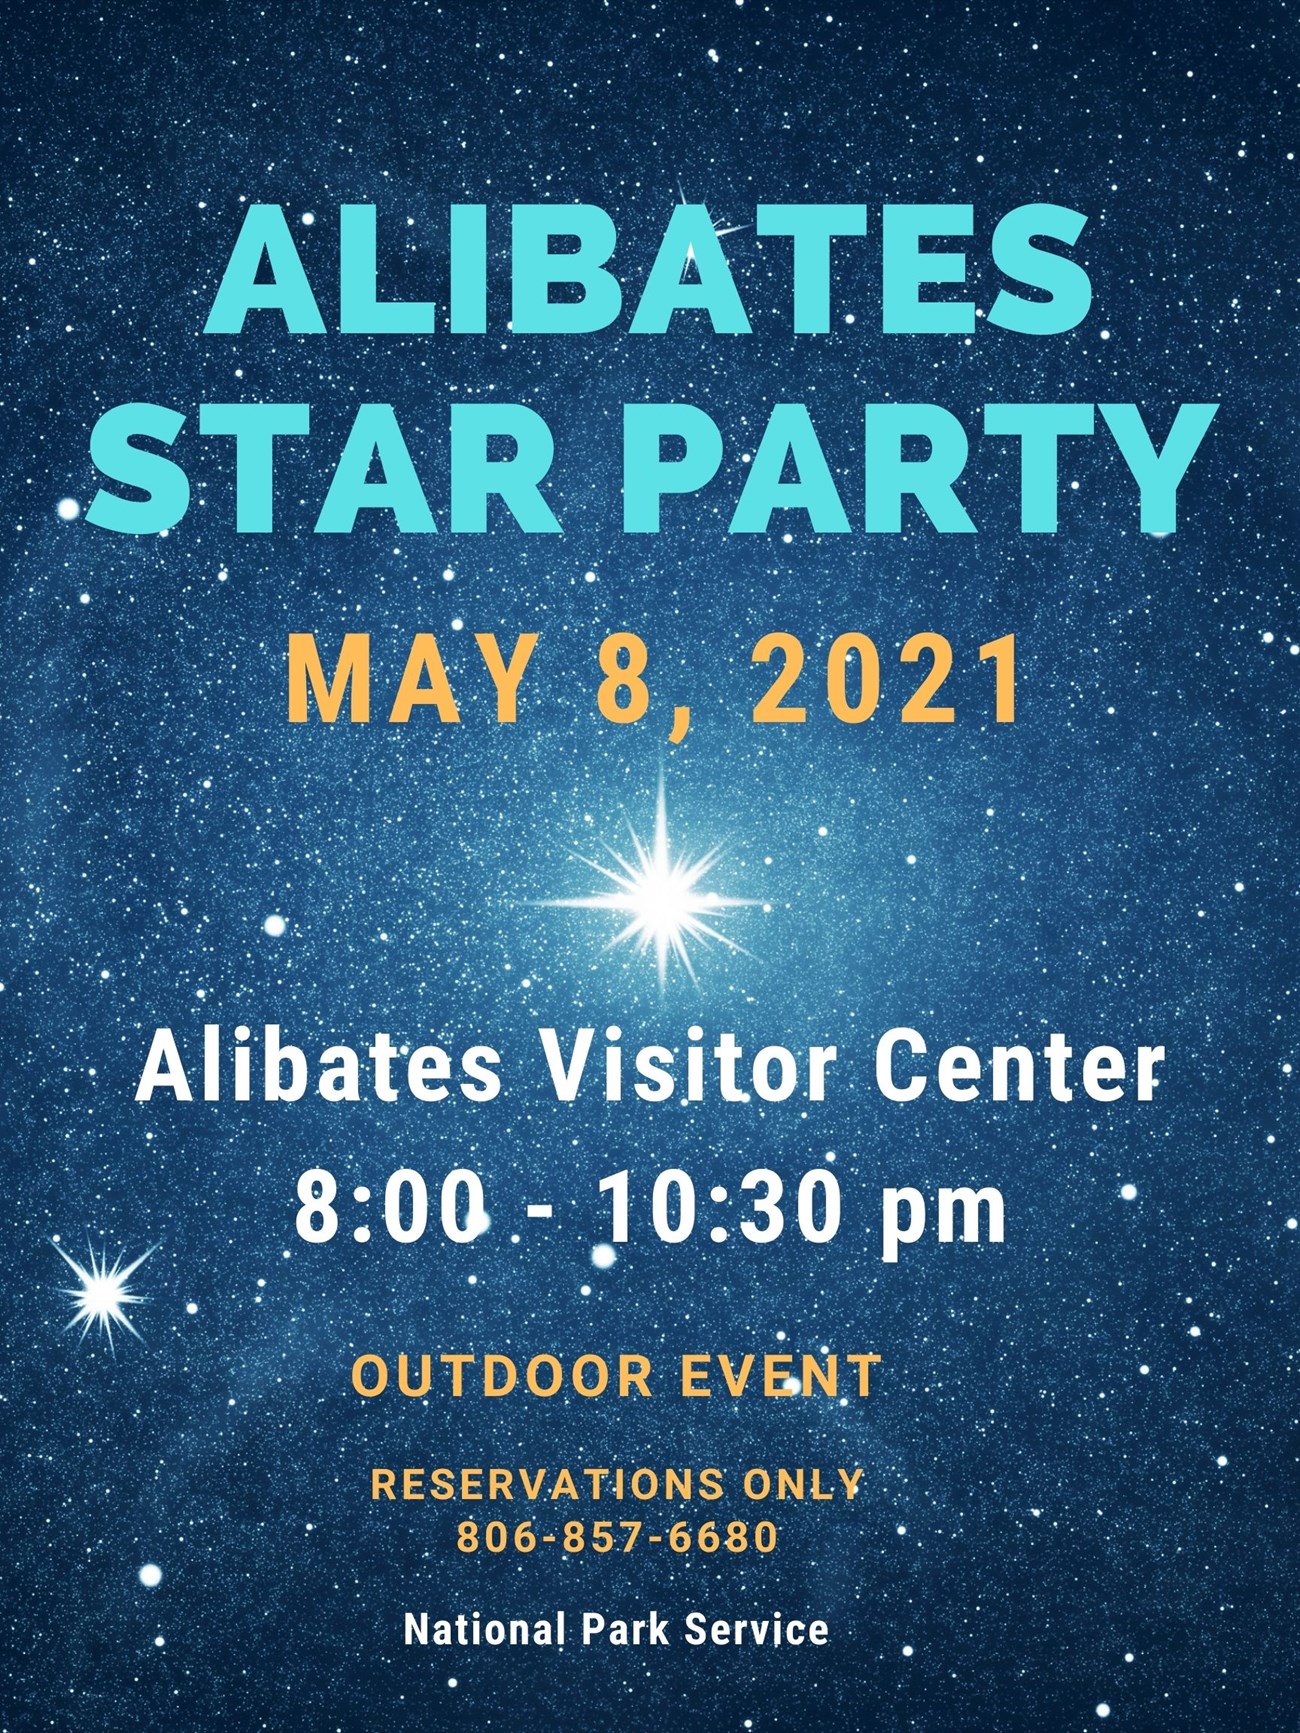 Star Party Flyer.  The background has stars and is mostly blue.  The date is May 8, 2021.  The time is 8:00 - 10:30 PM.  Reservations only.  It is an outdoor event